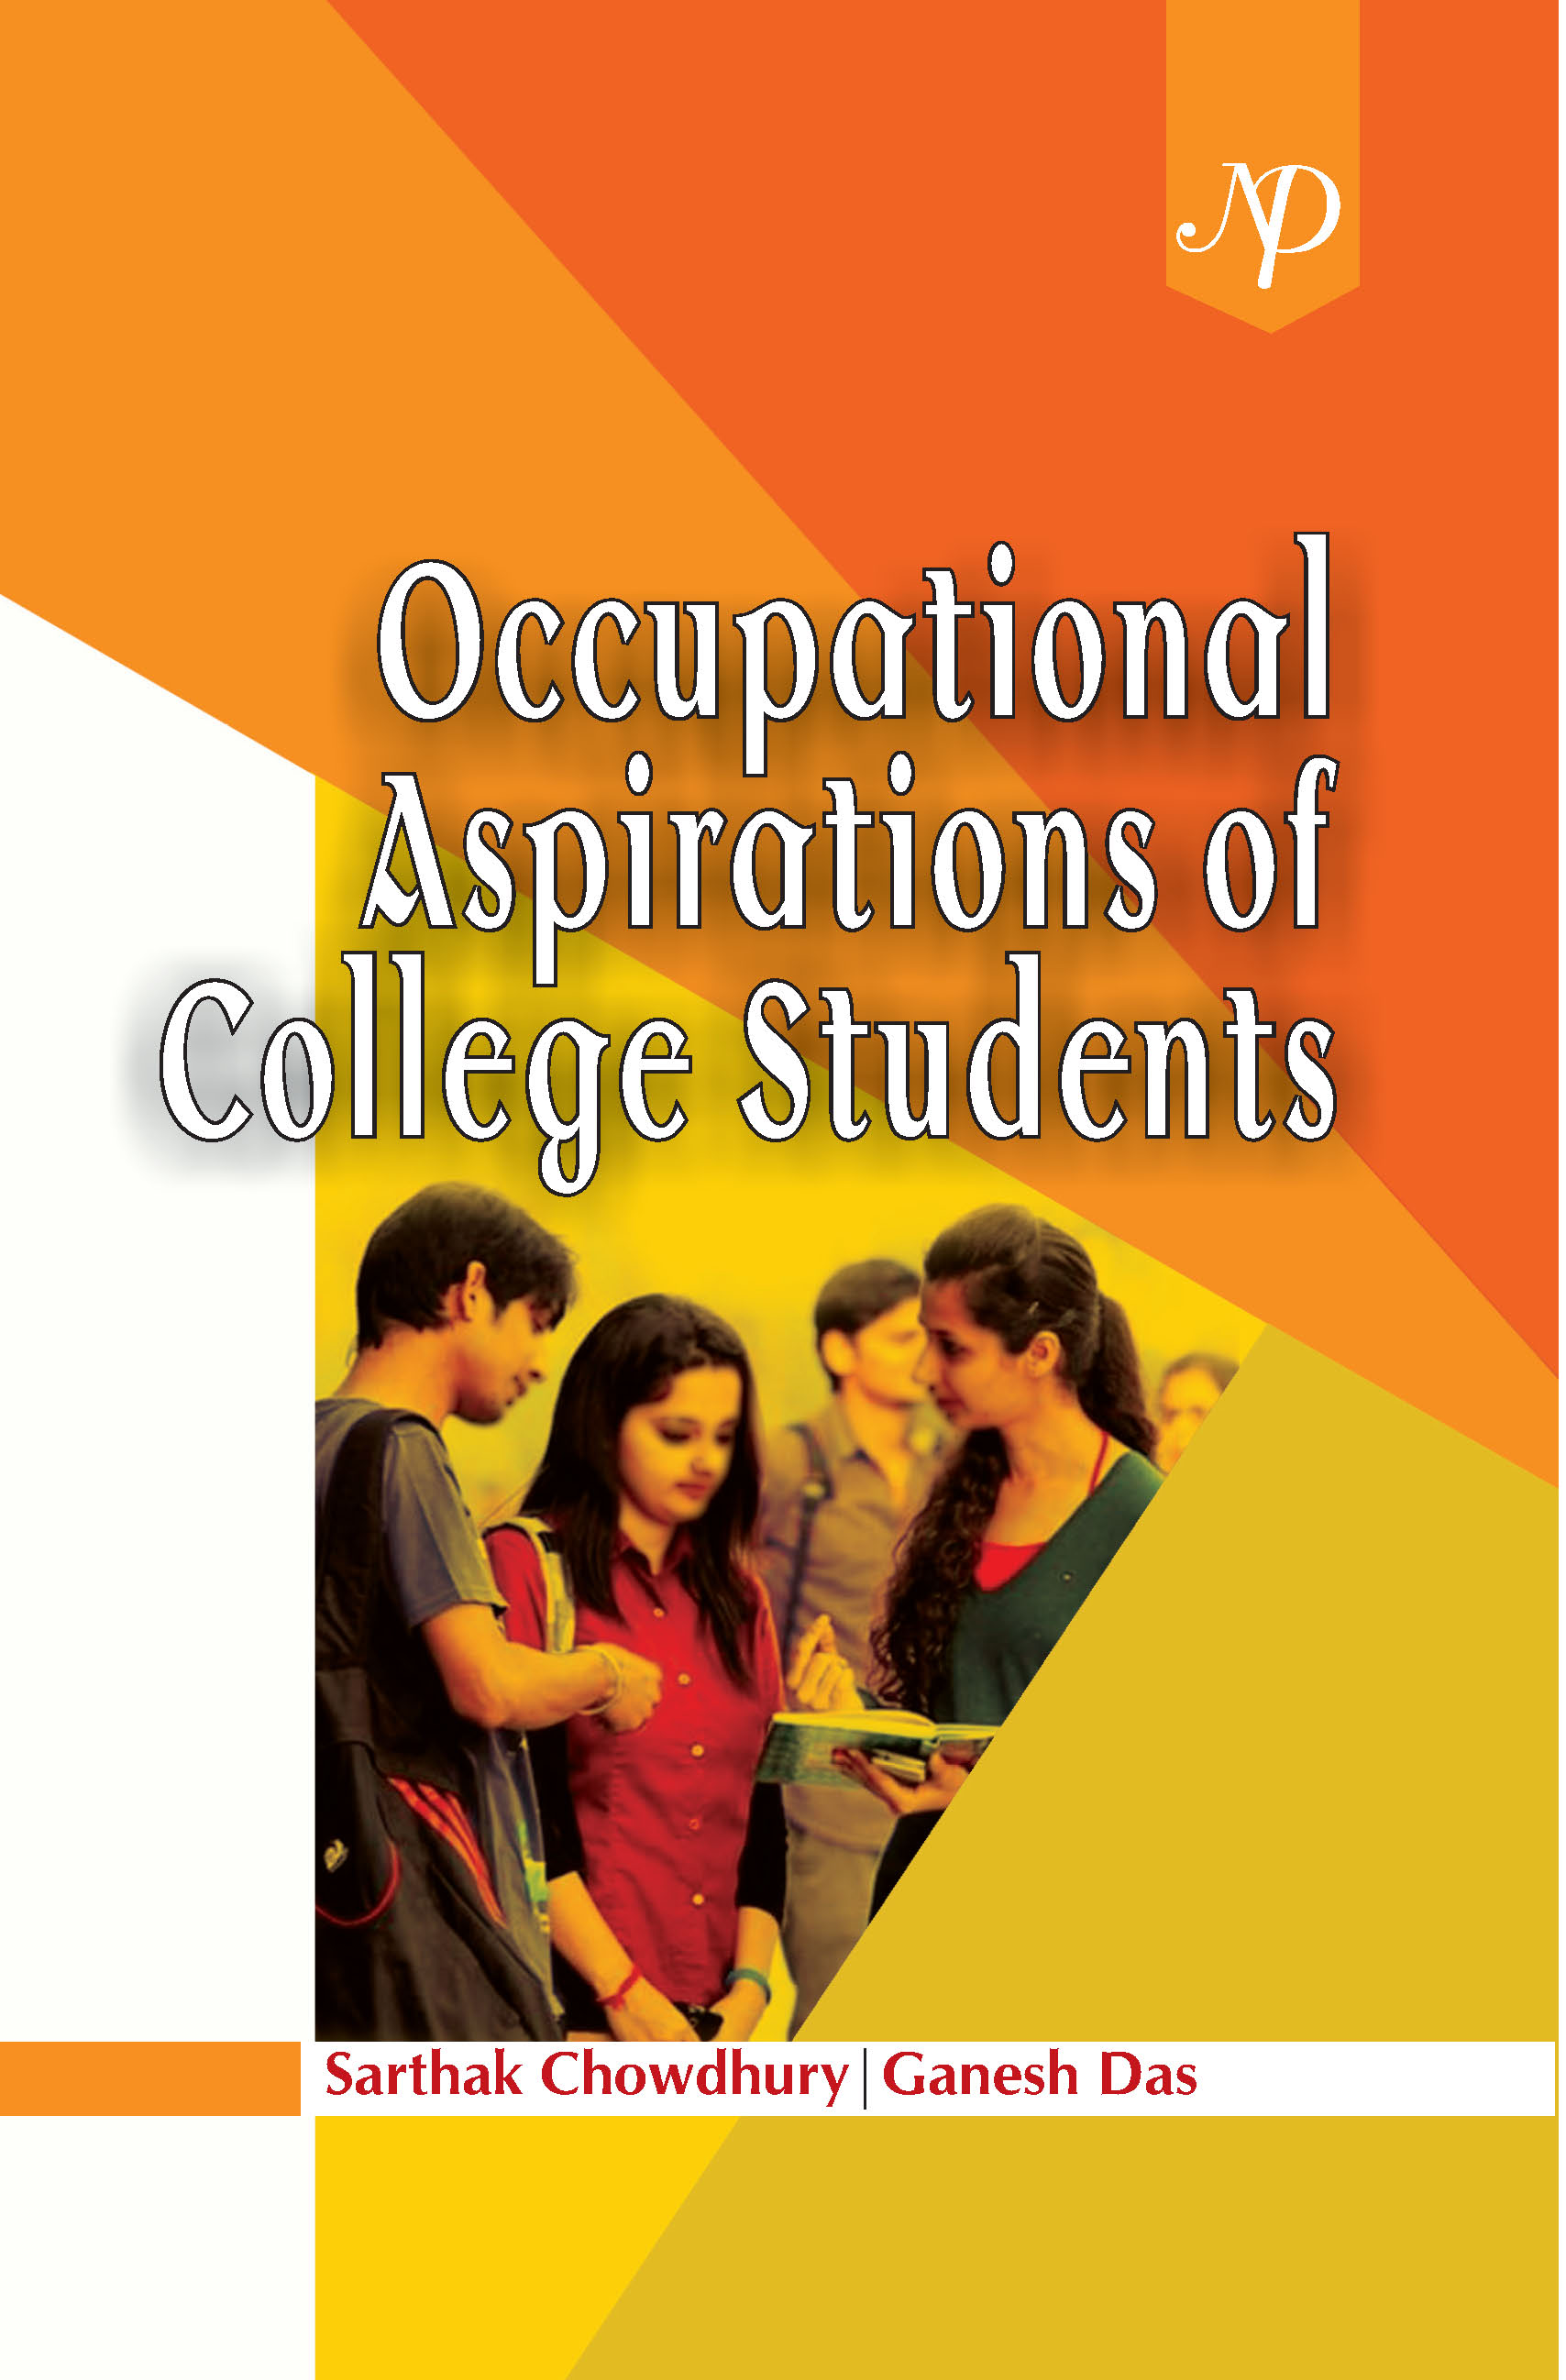 Occupational aspiration of College students Cover.jpg